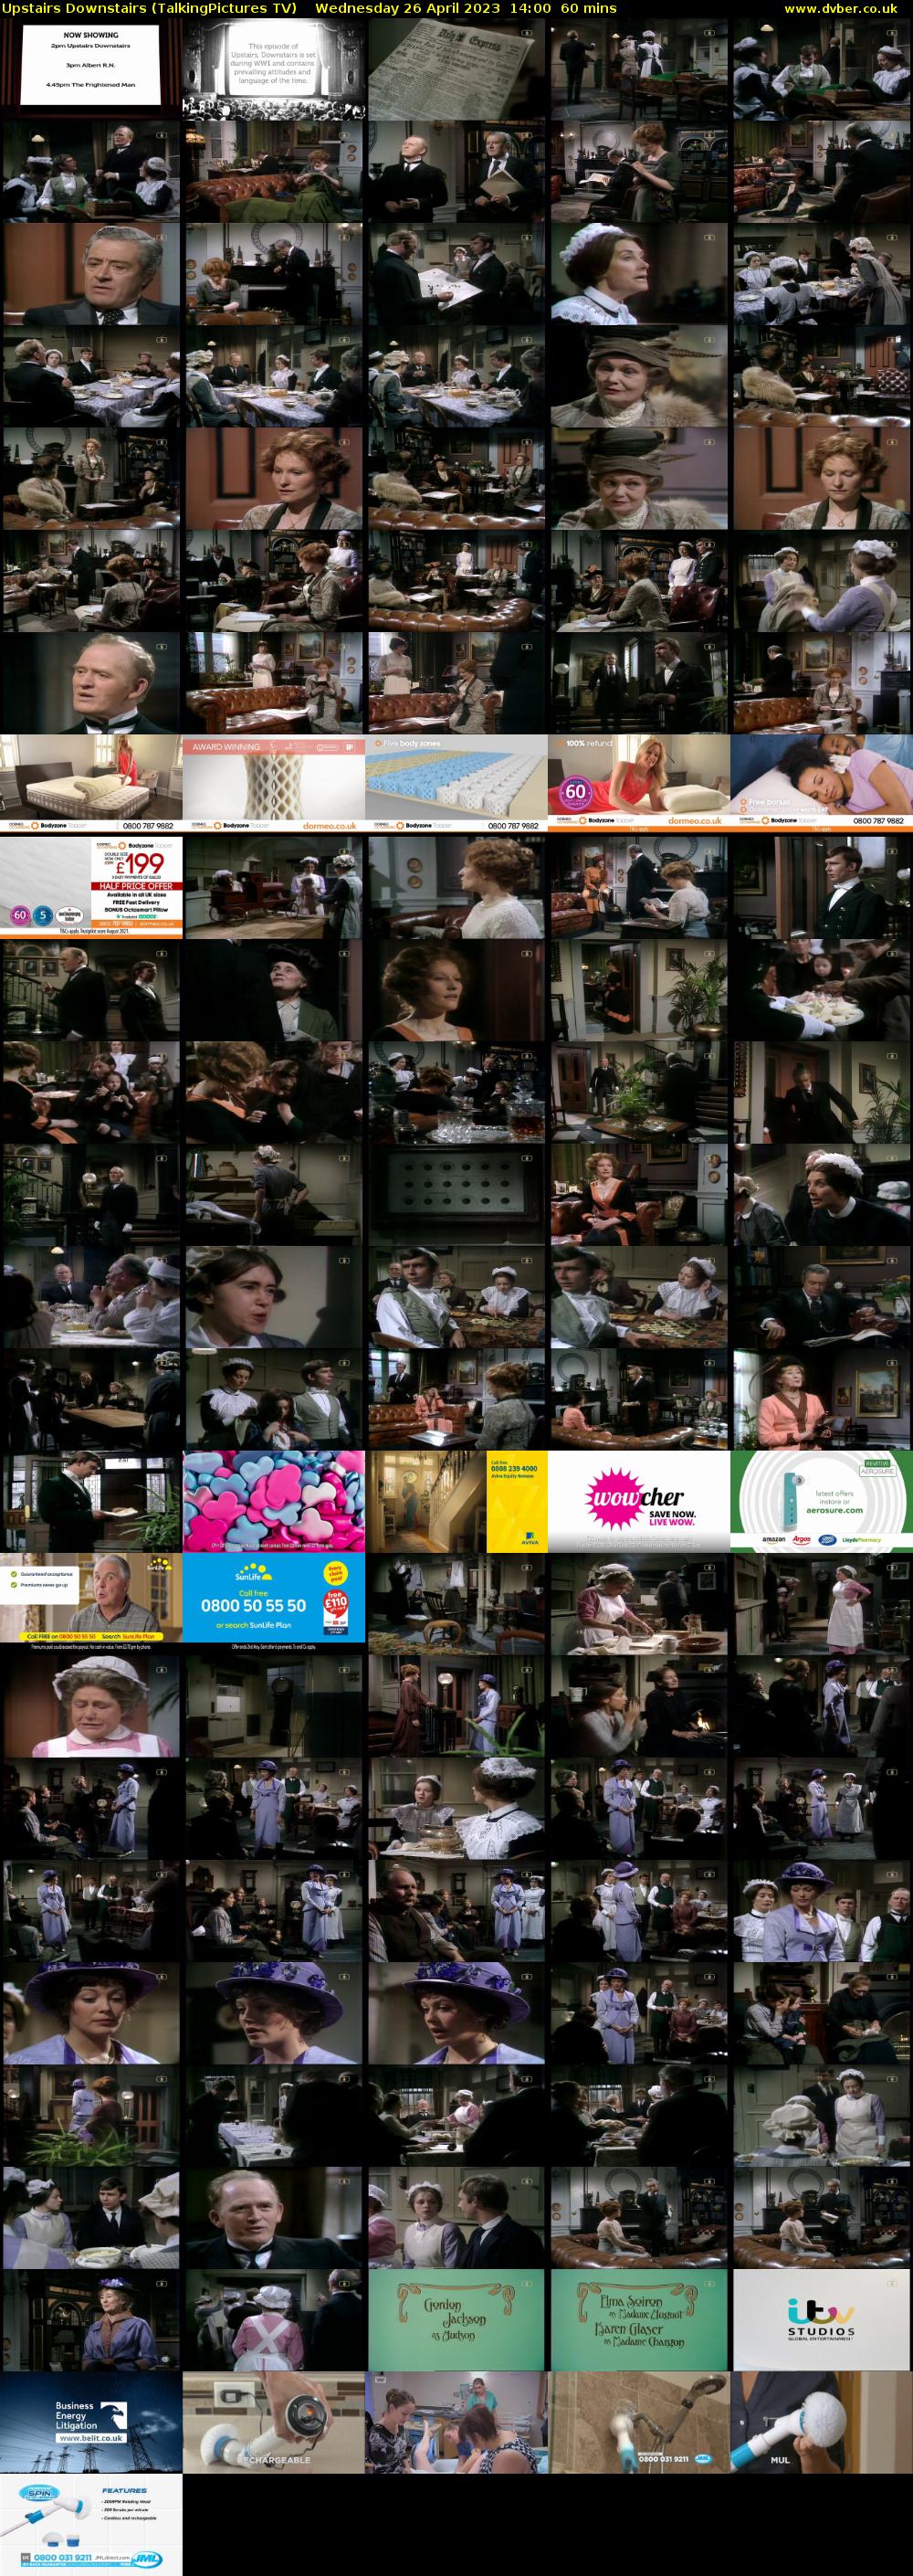 Upstairs Downstairs (TalkingPictures TV) Wednesday 26 April 2023 14:00 - 15:00